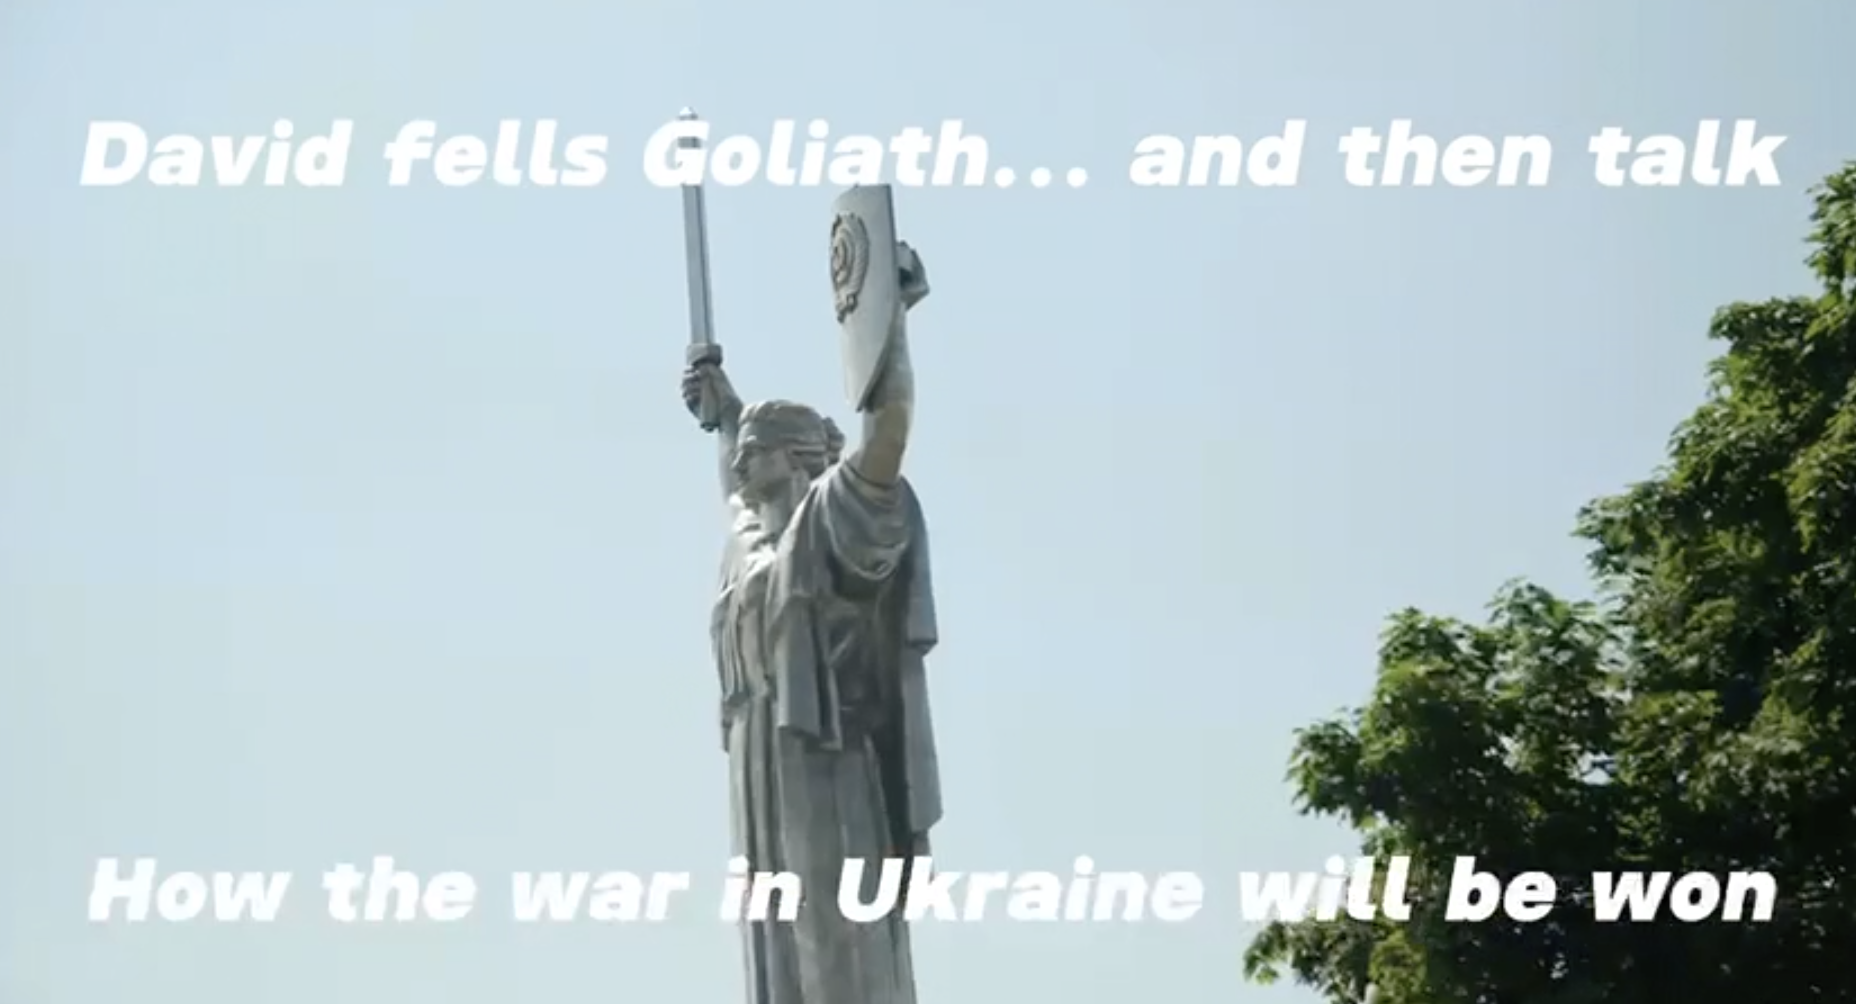 David Fells Goliath…and Then Talk. How the War in Ukraine Will be Won